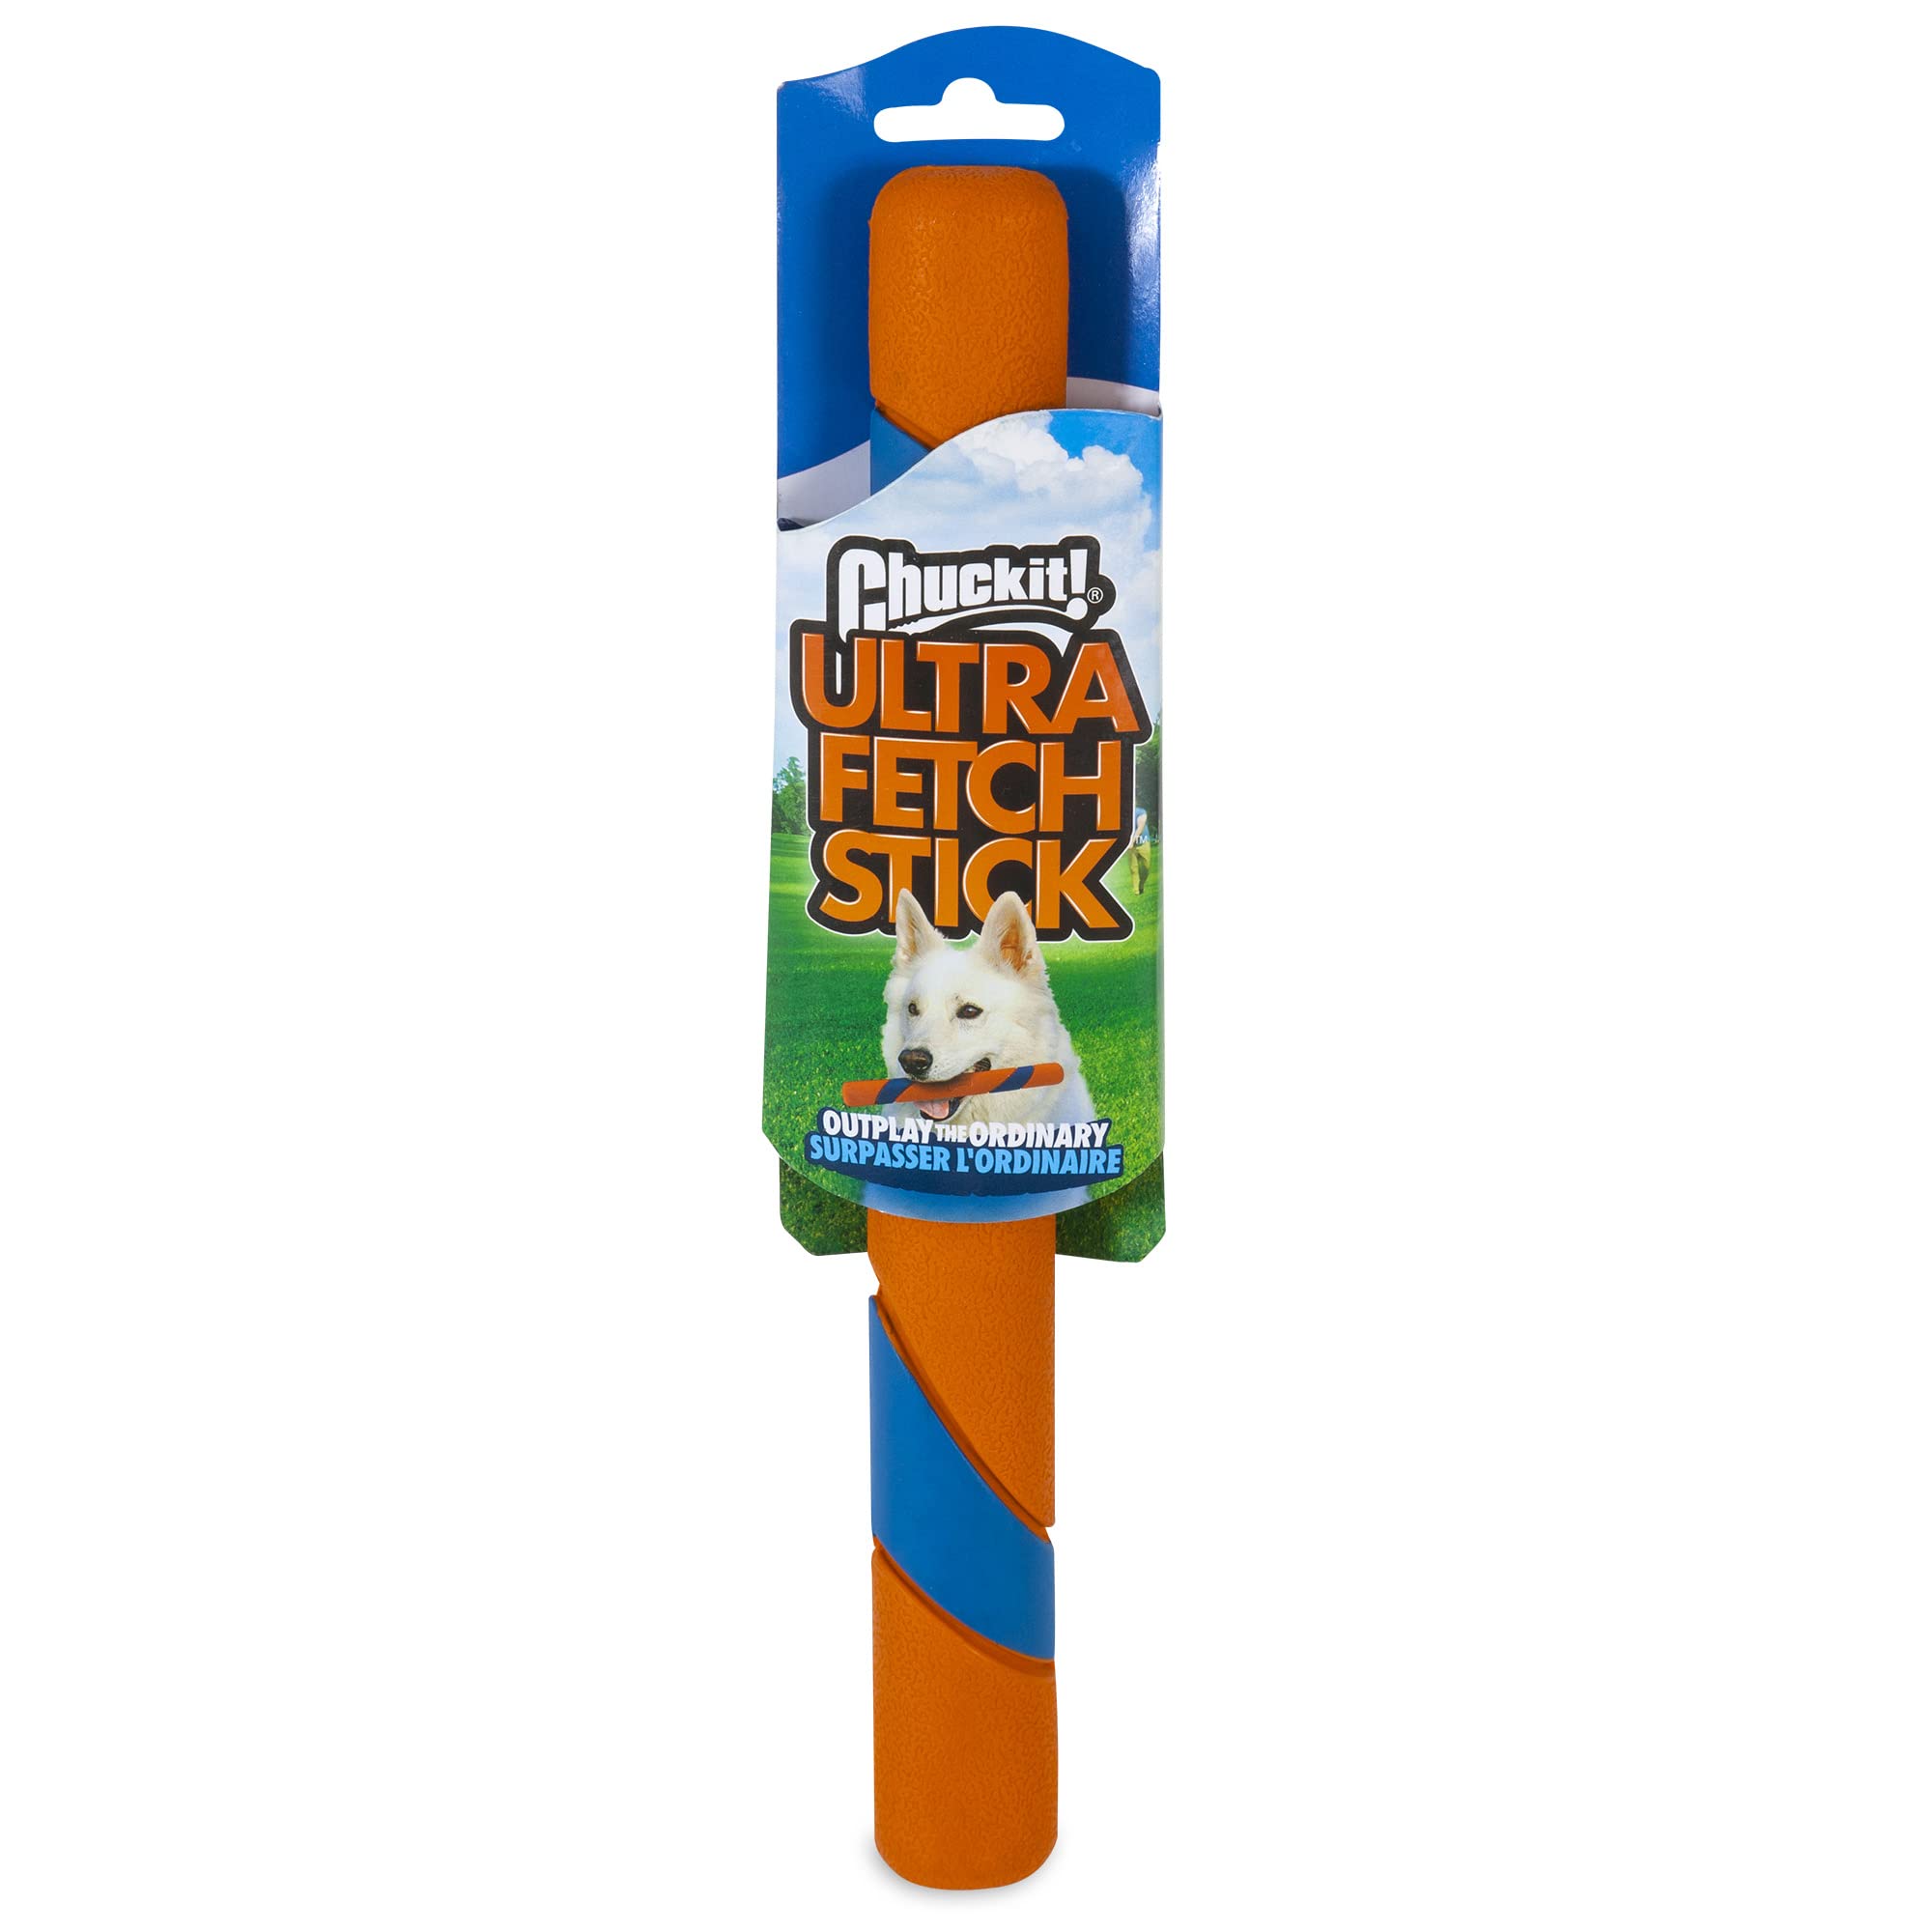 Chuckit Ultra Fetch Stick Outdoor Dog Toy, 12 Inches, for All Breed Sizes $4.55